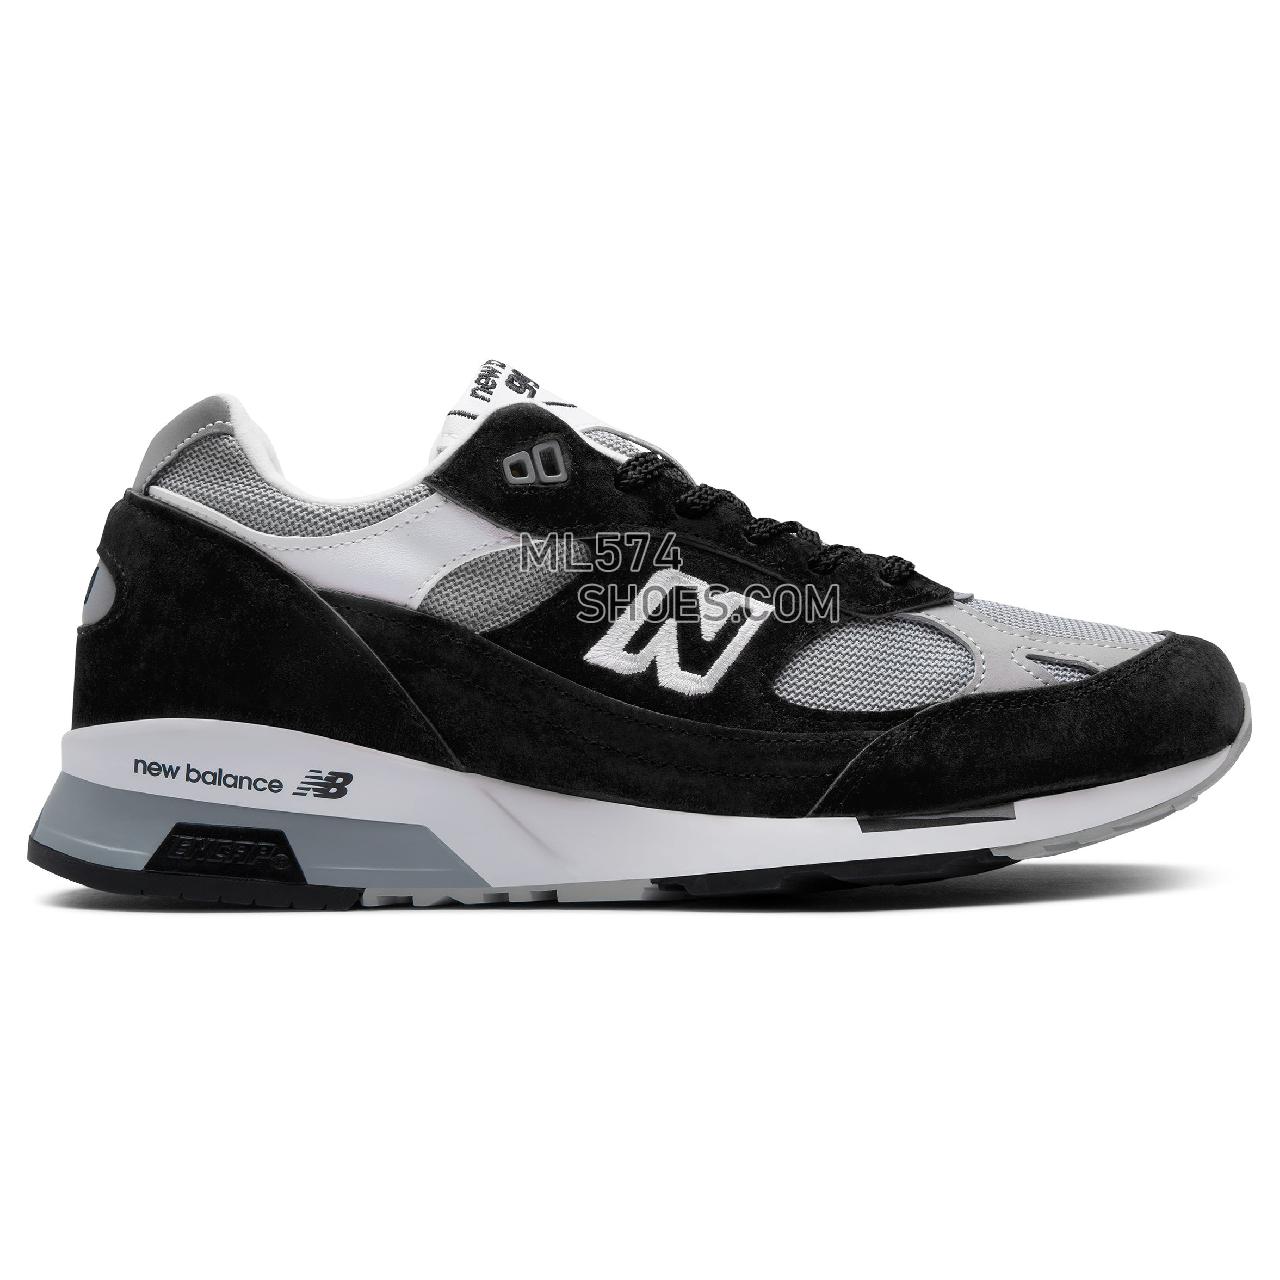 New Balance 991.5 Made in UK - Men's 9915 - Classic Black with Grey and White - M9915BB